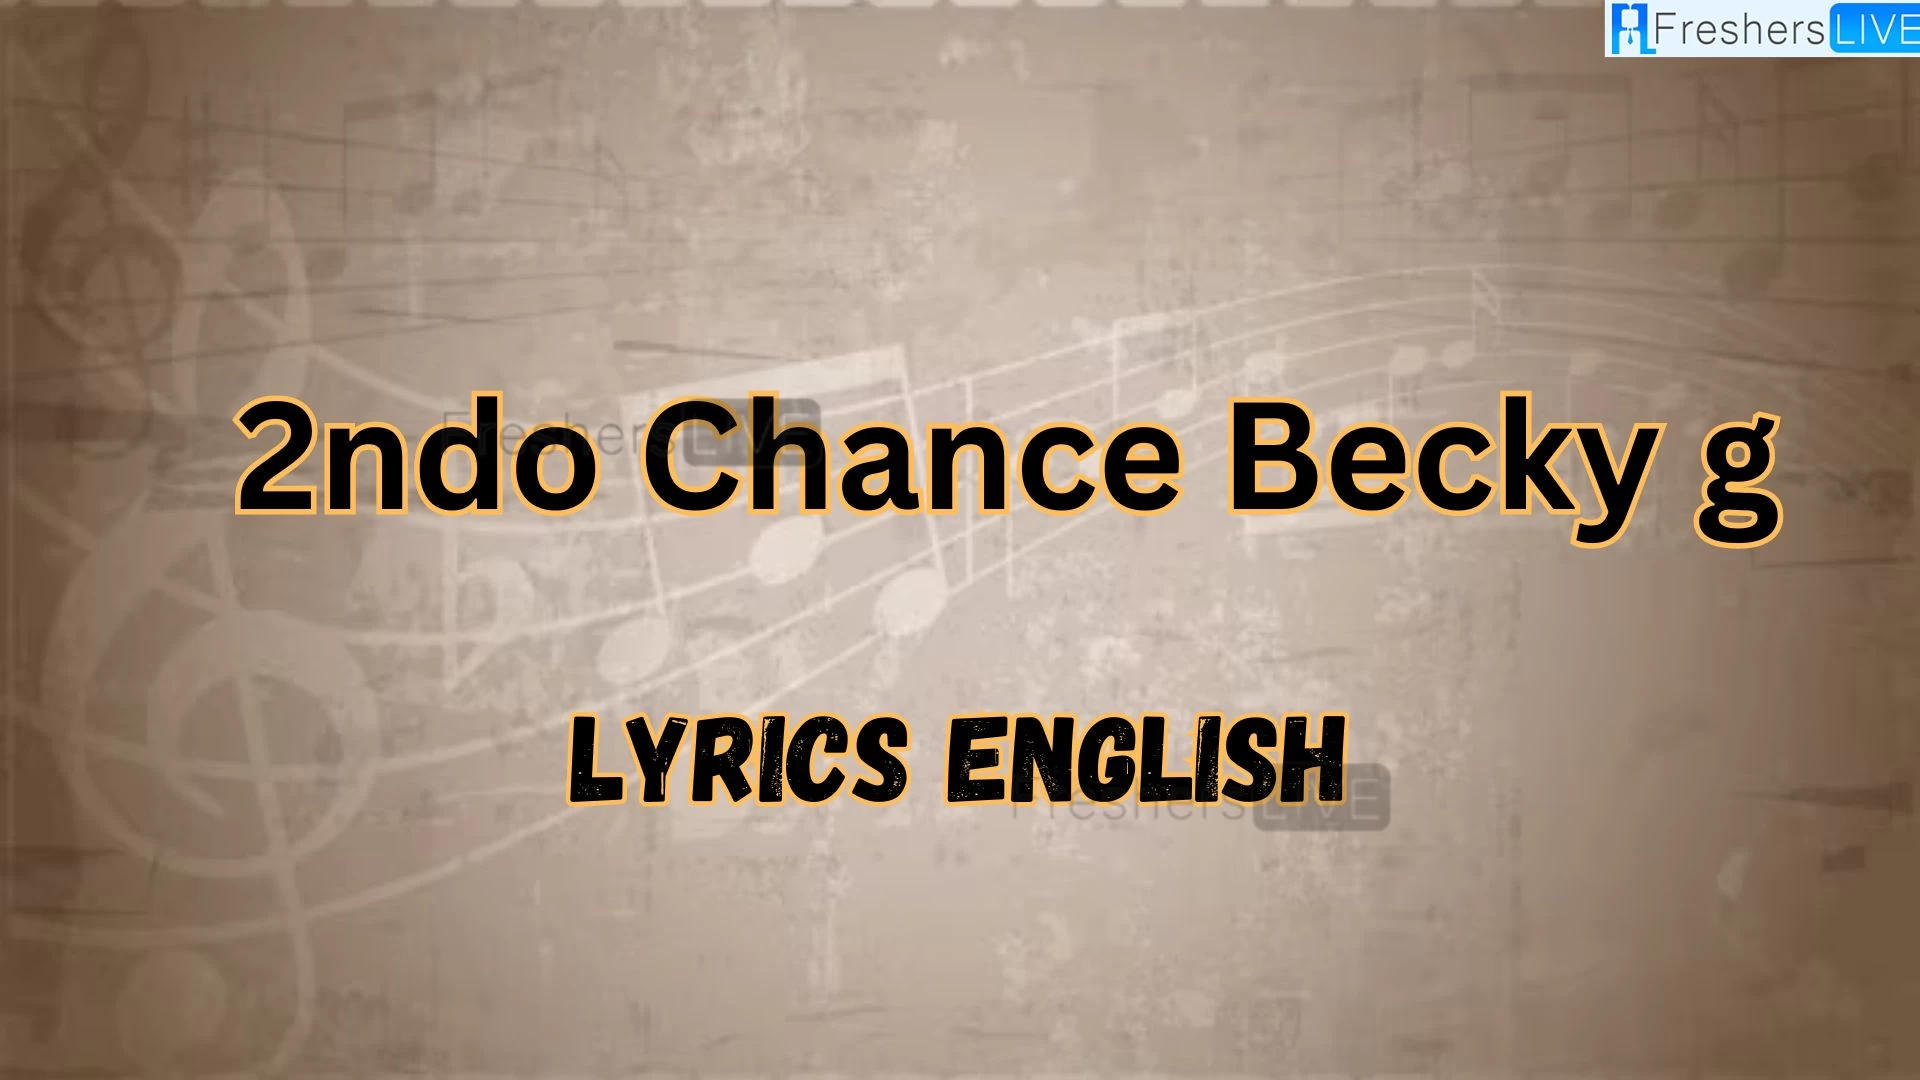 2ndo Chance Becky G Lyrics English, Meaning and More